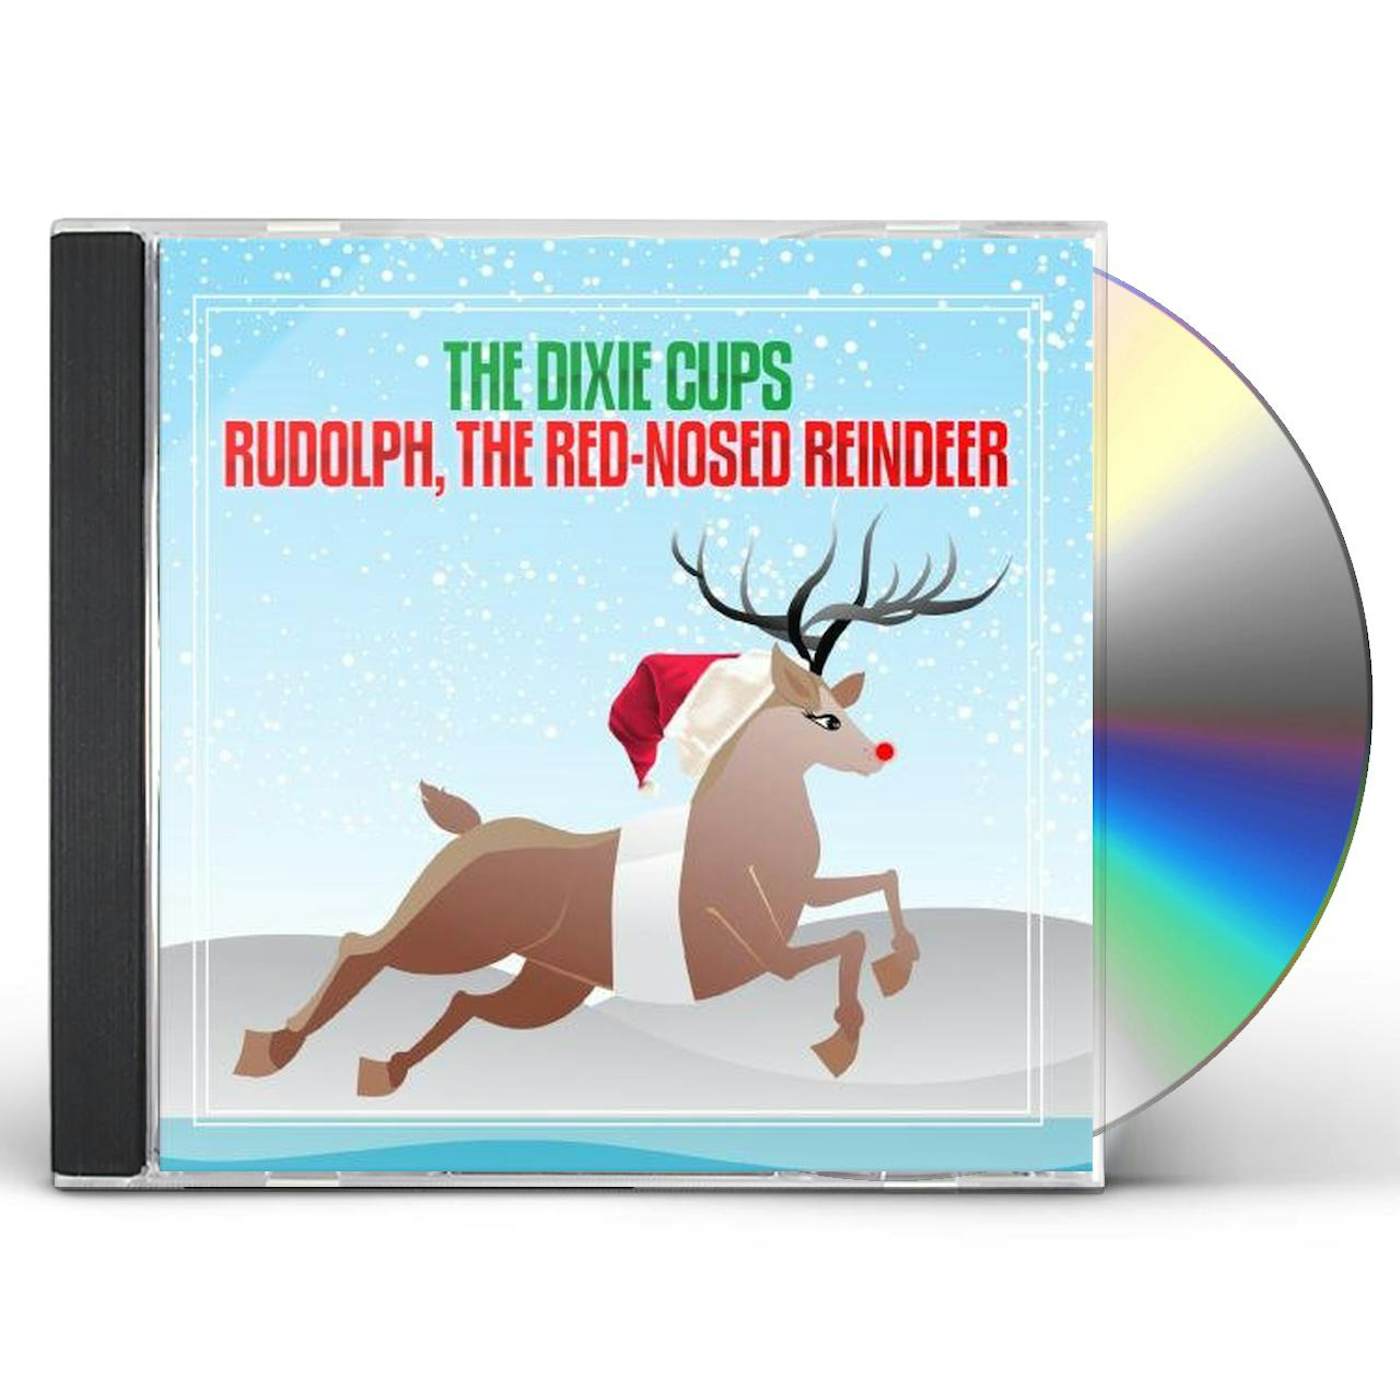 The Dixie Cups RUDOLPH THE RED-NOSED REINDEER CD